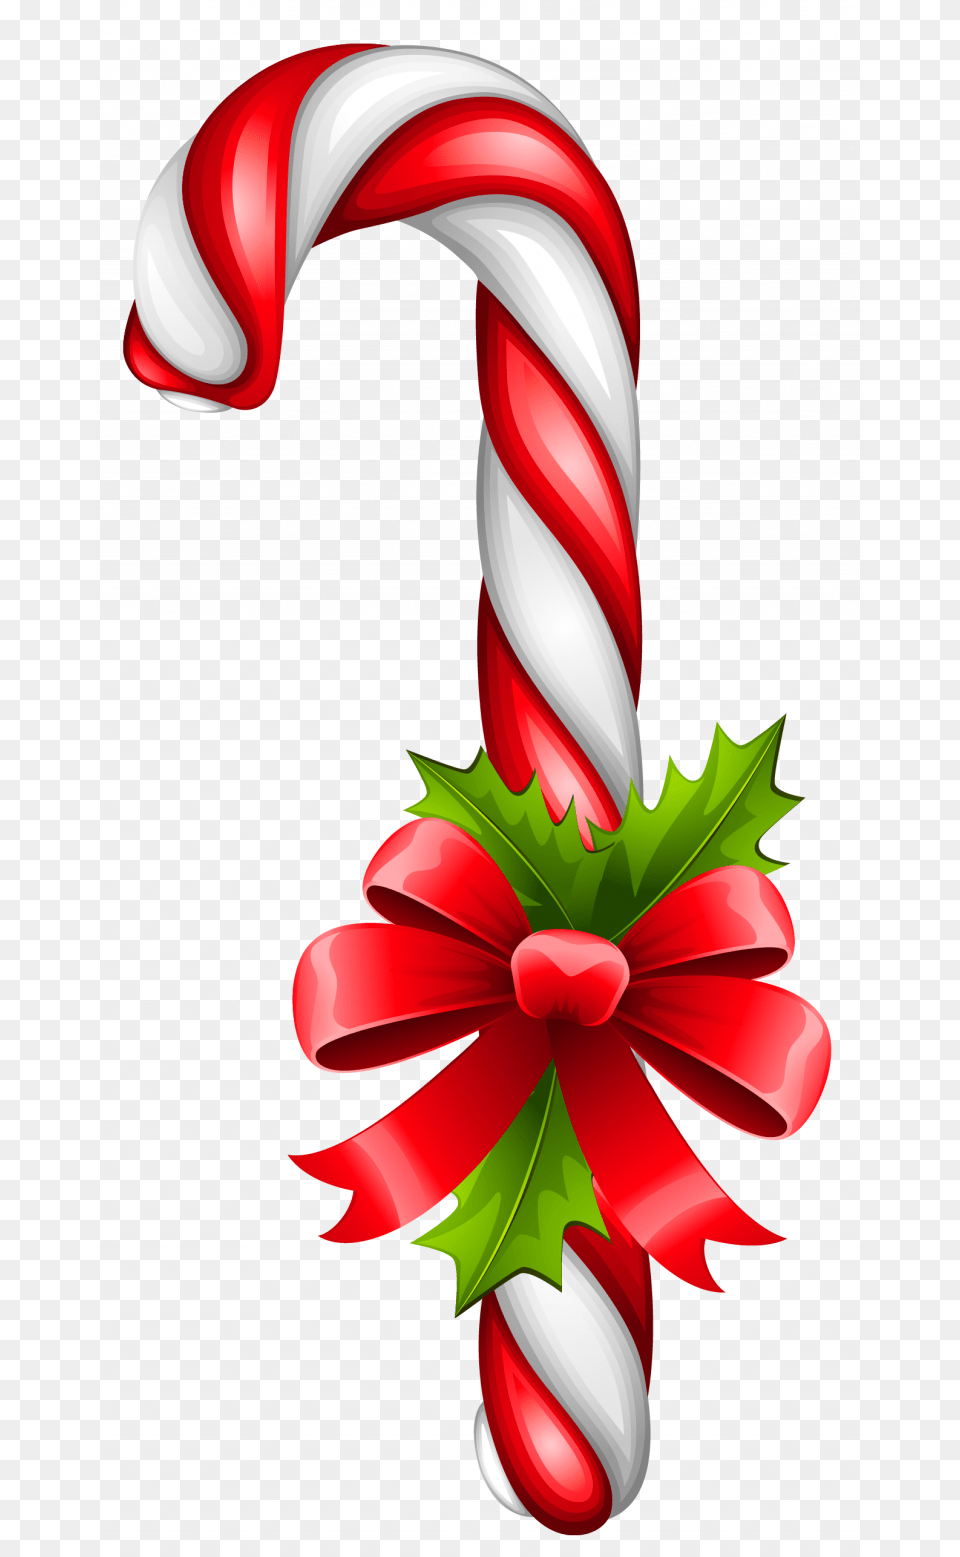 Free Download Of Christmas Candy Icon Christmas Candy Cane Transparent, Food, Sweets Png Image